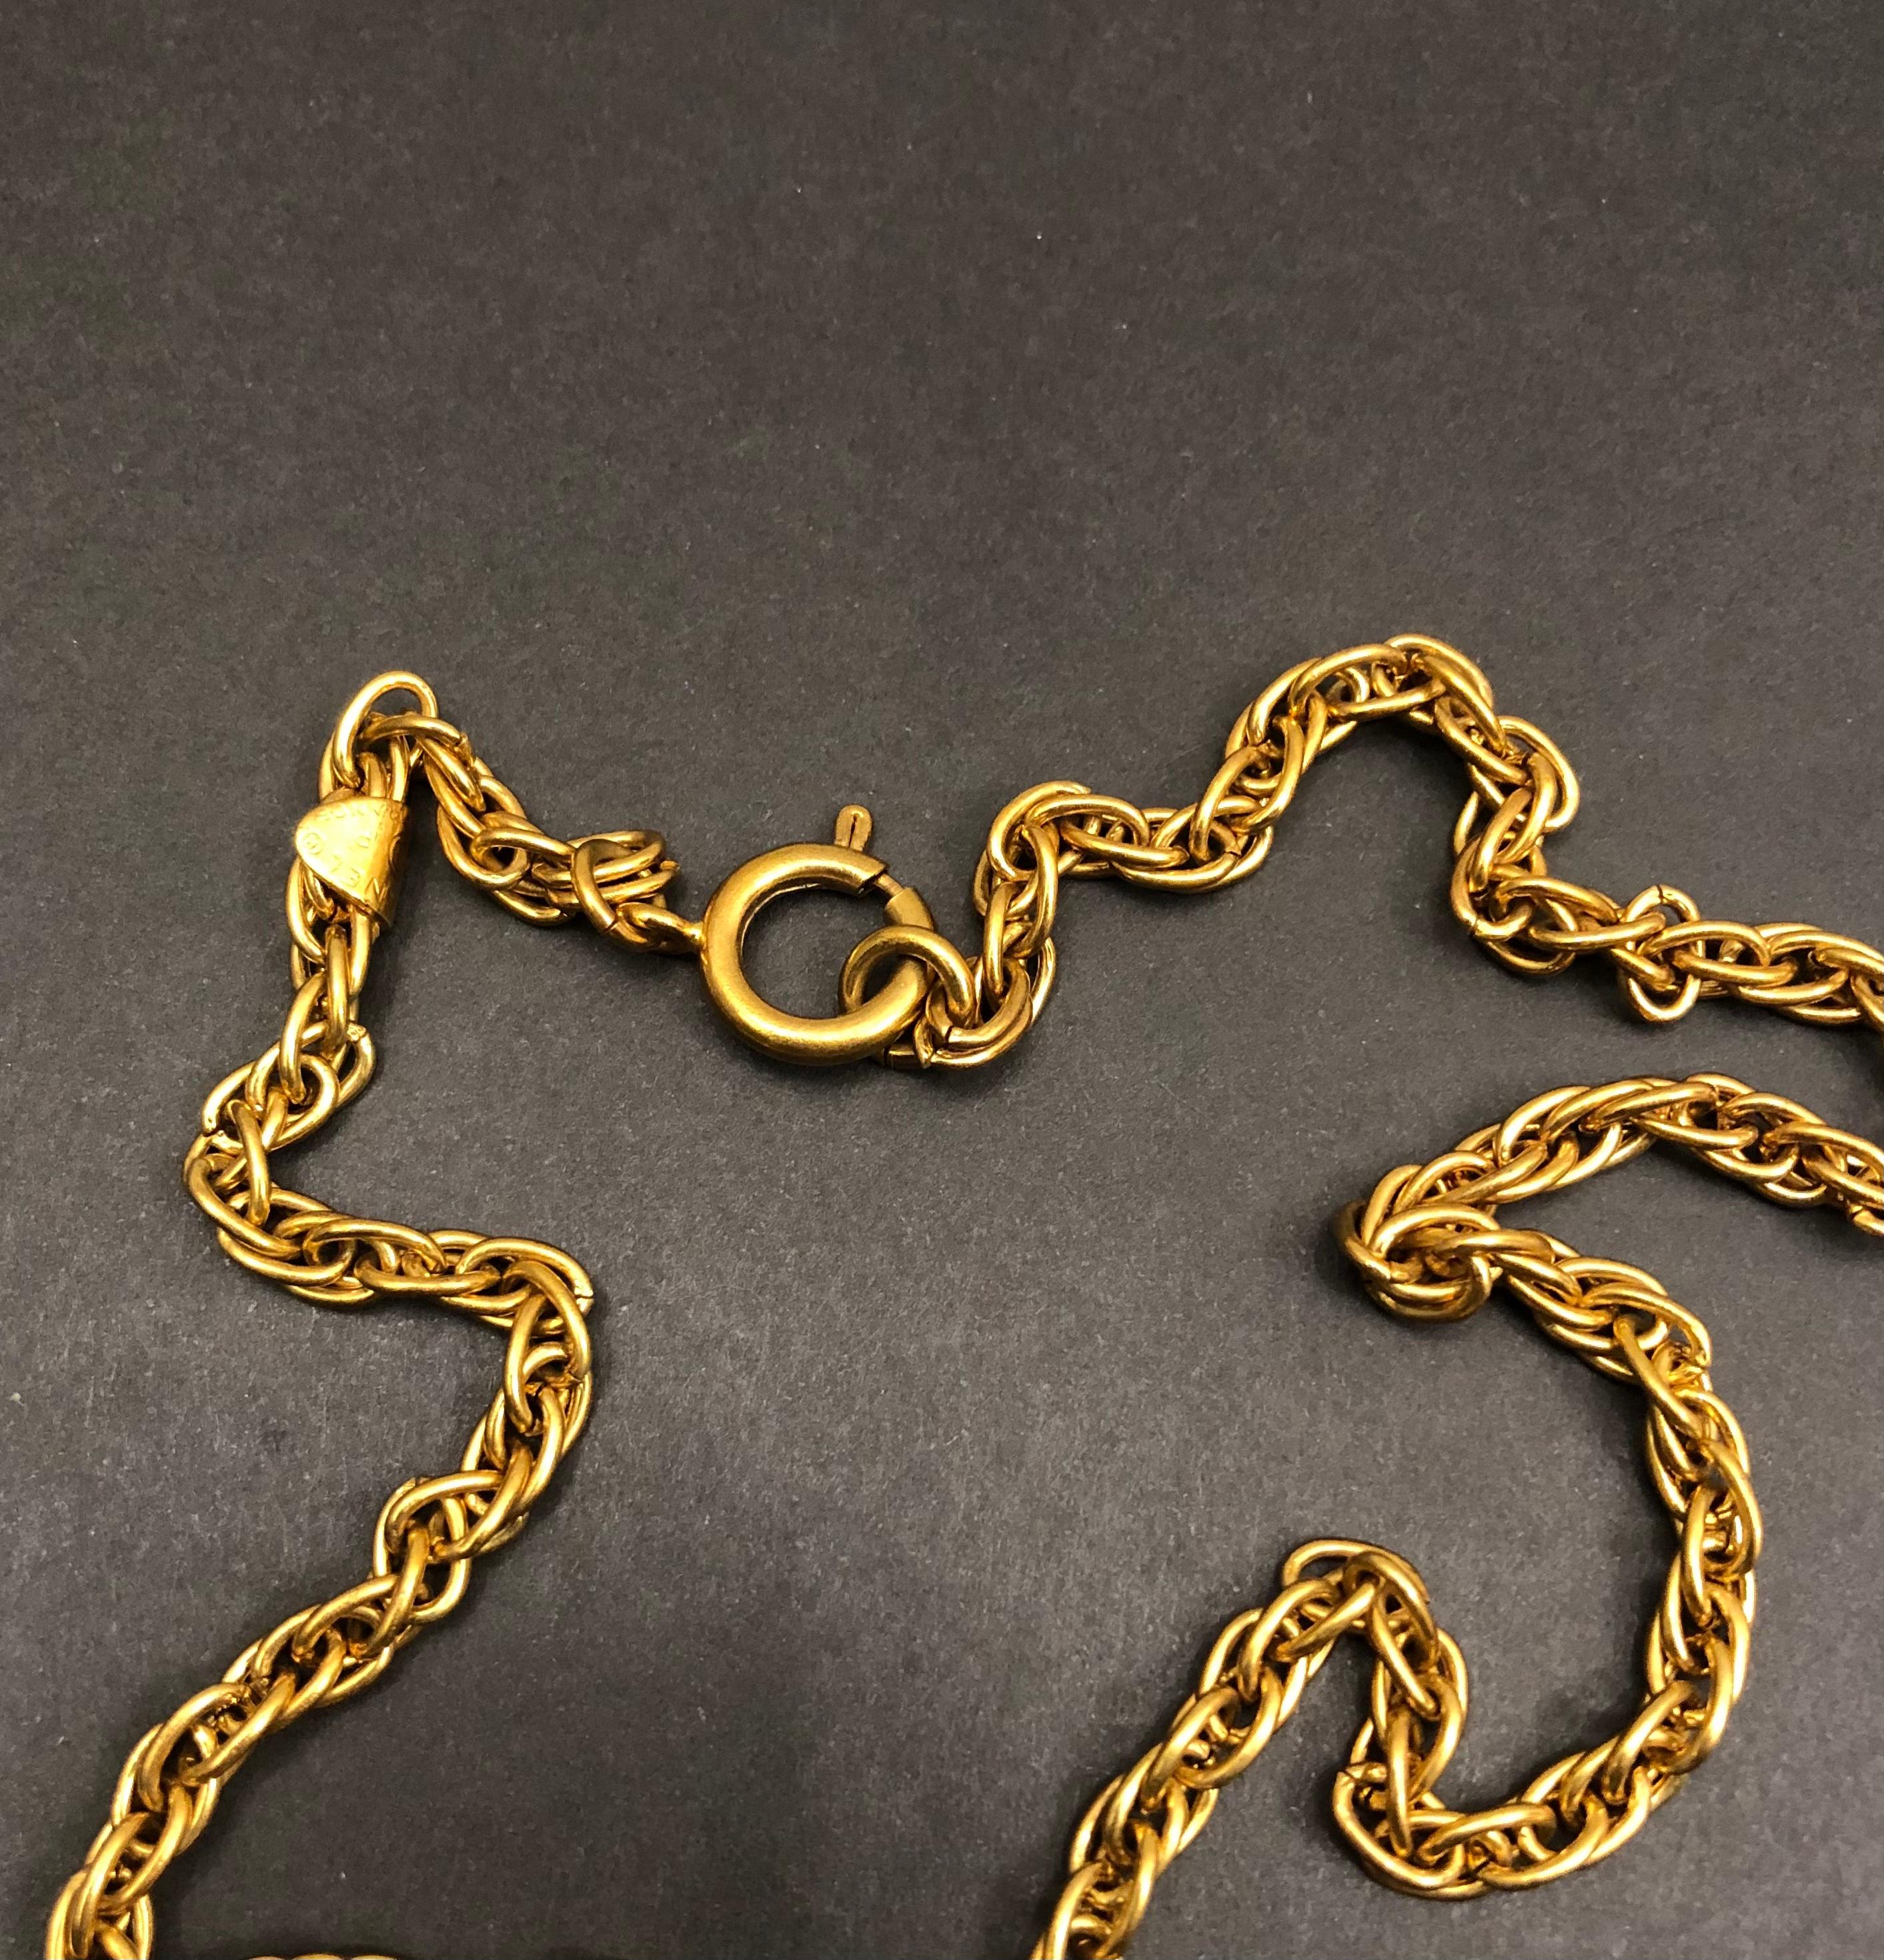 1993 Vintage CHANEL Gold Toned Short Chain Necklace For Sale 6